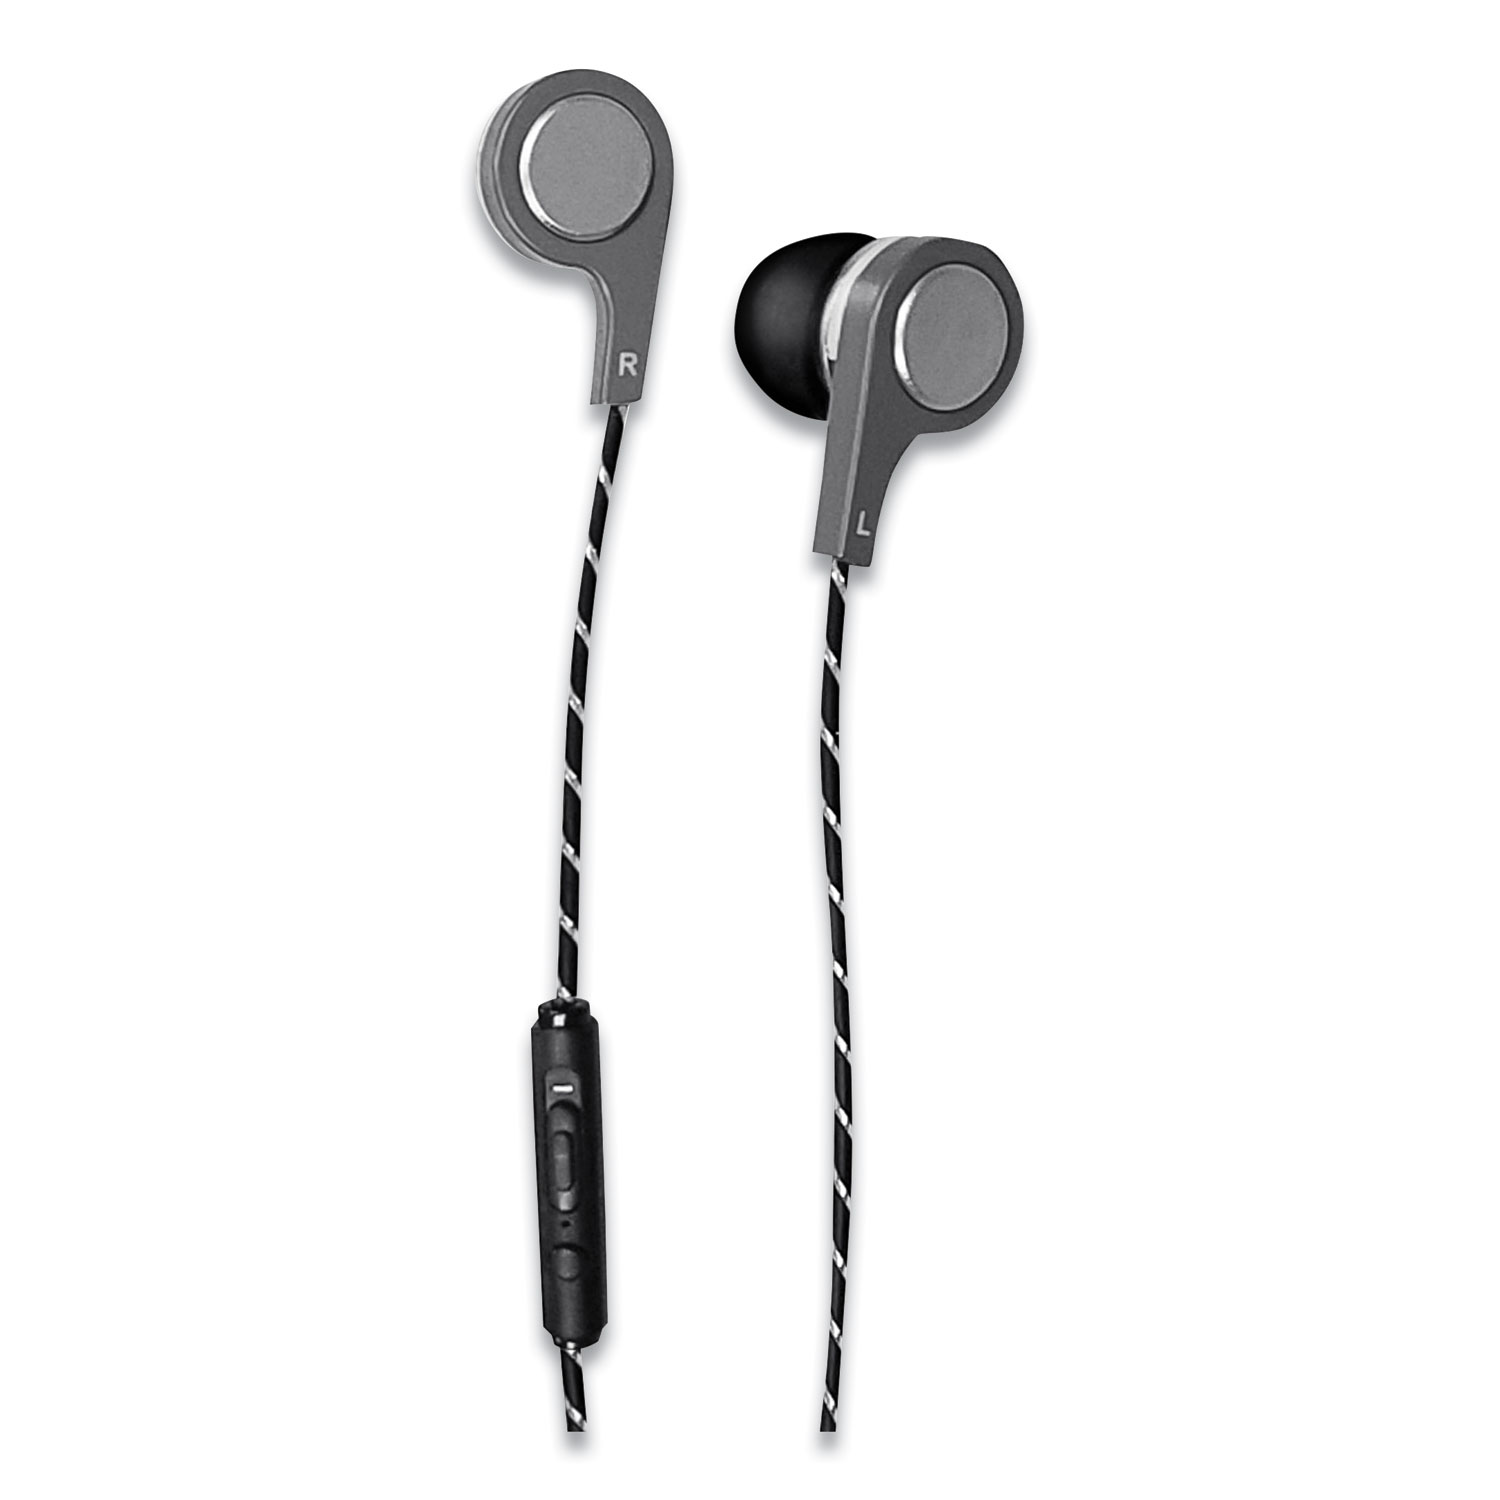  Maxell 199600 Bass 13 Metallic Wireless Earbuds with Microphone, Silver (MAX199600) 